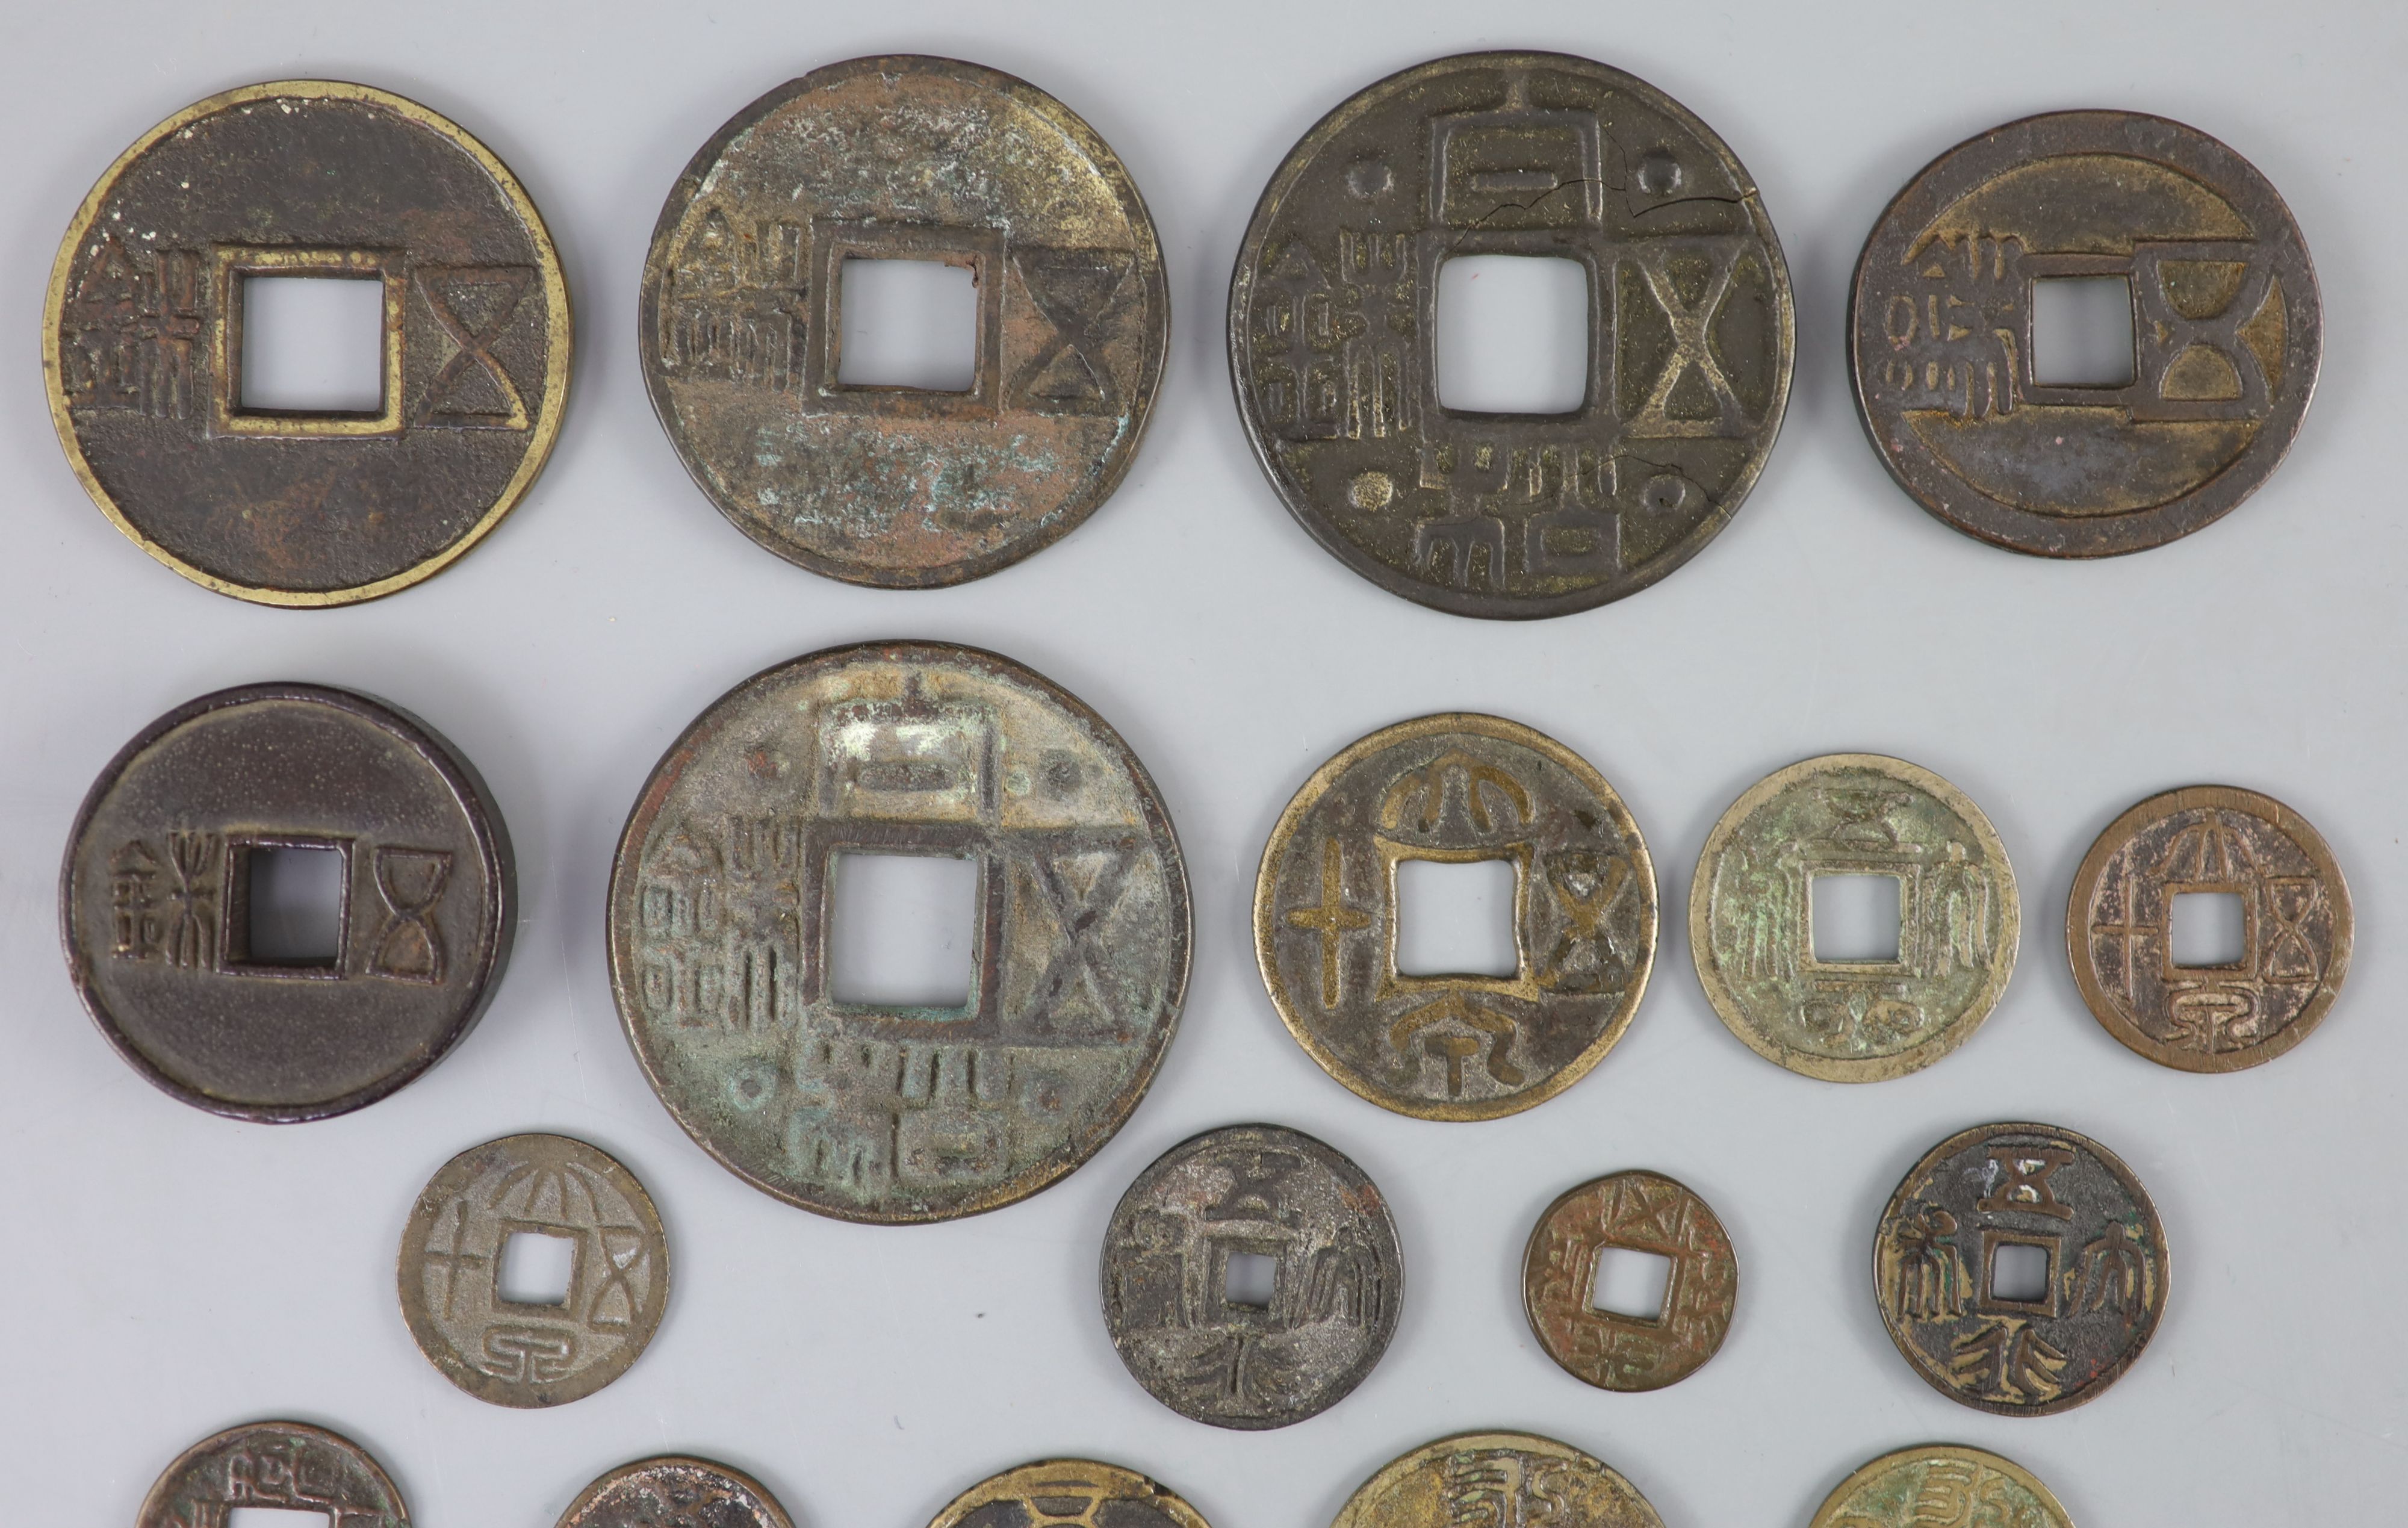 China, a group of 6 bronze coin charms or amulets, 19th century and various Thai (Siamese) porcelain gaming counters,